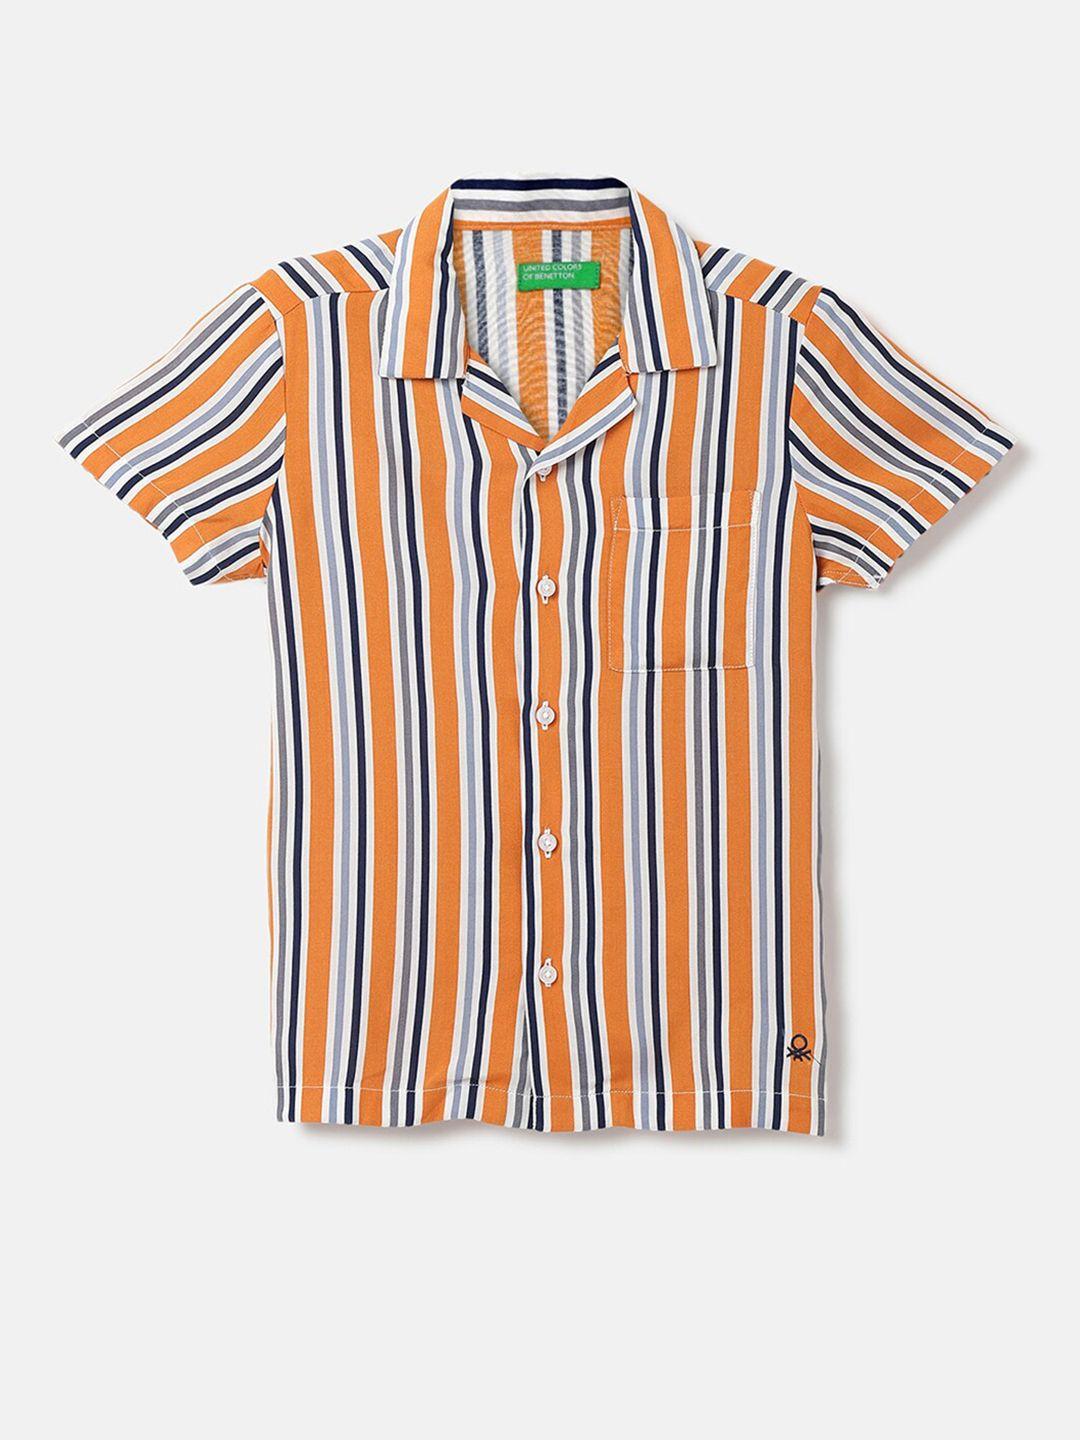 united colors of benetton boys striped casual shirt